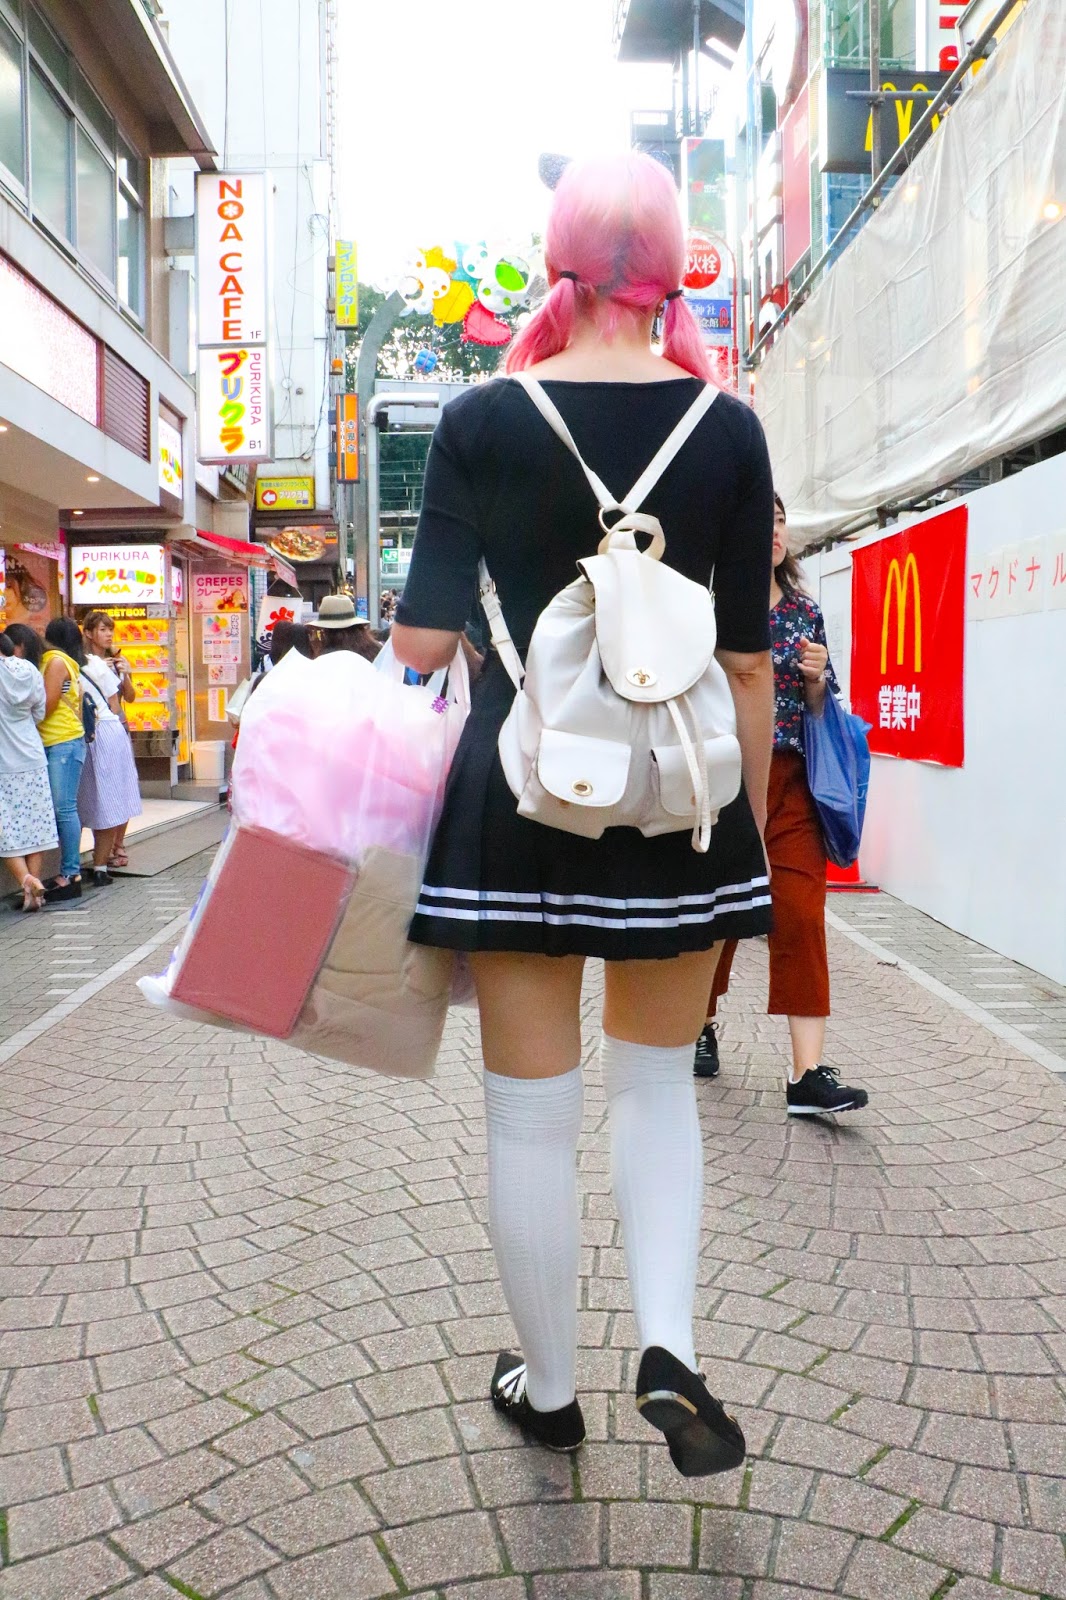 What to see on your trip to Harajuku Japan